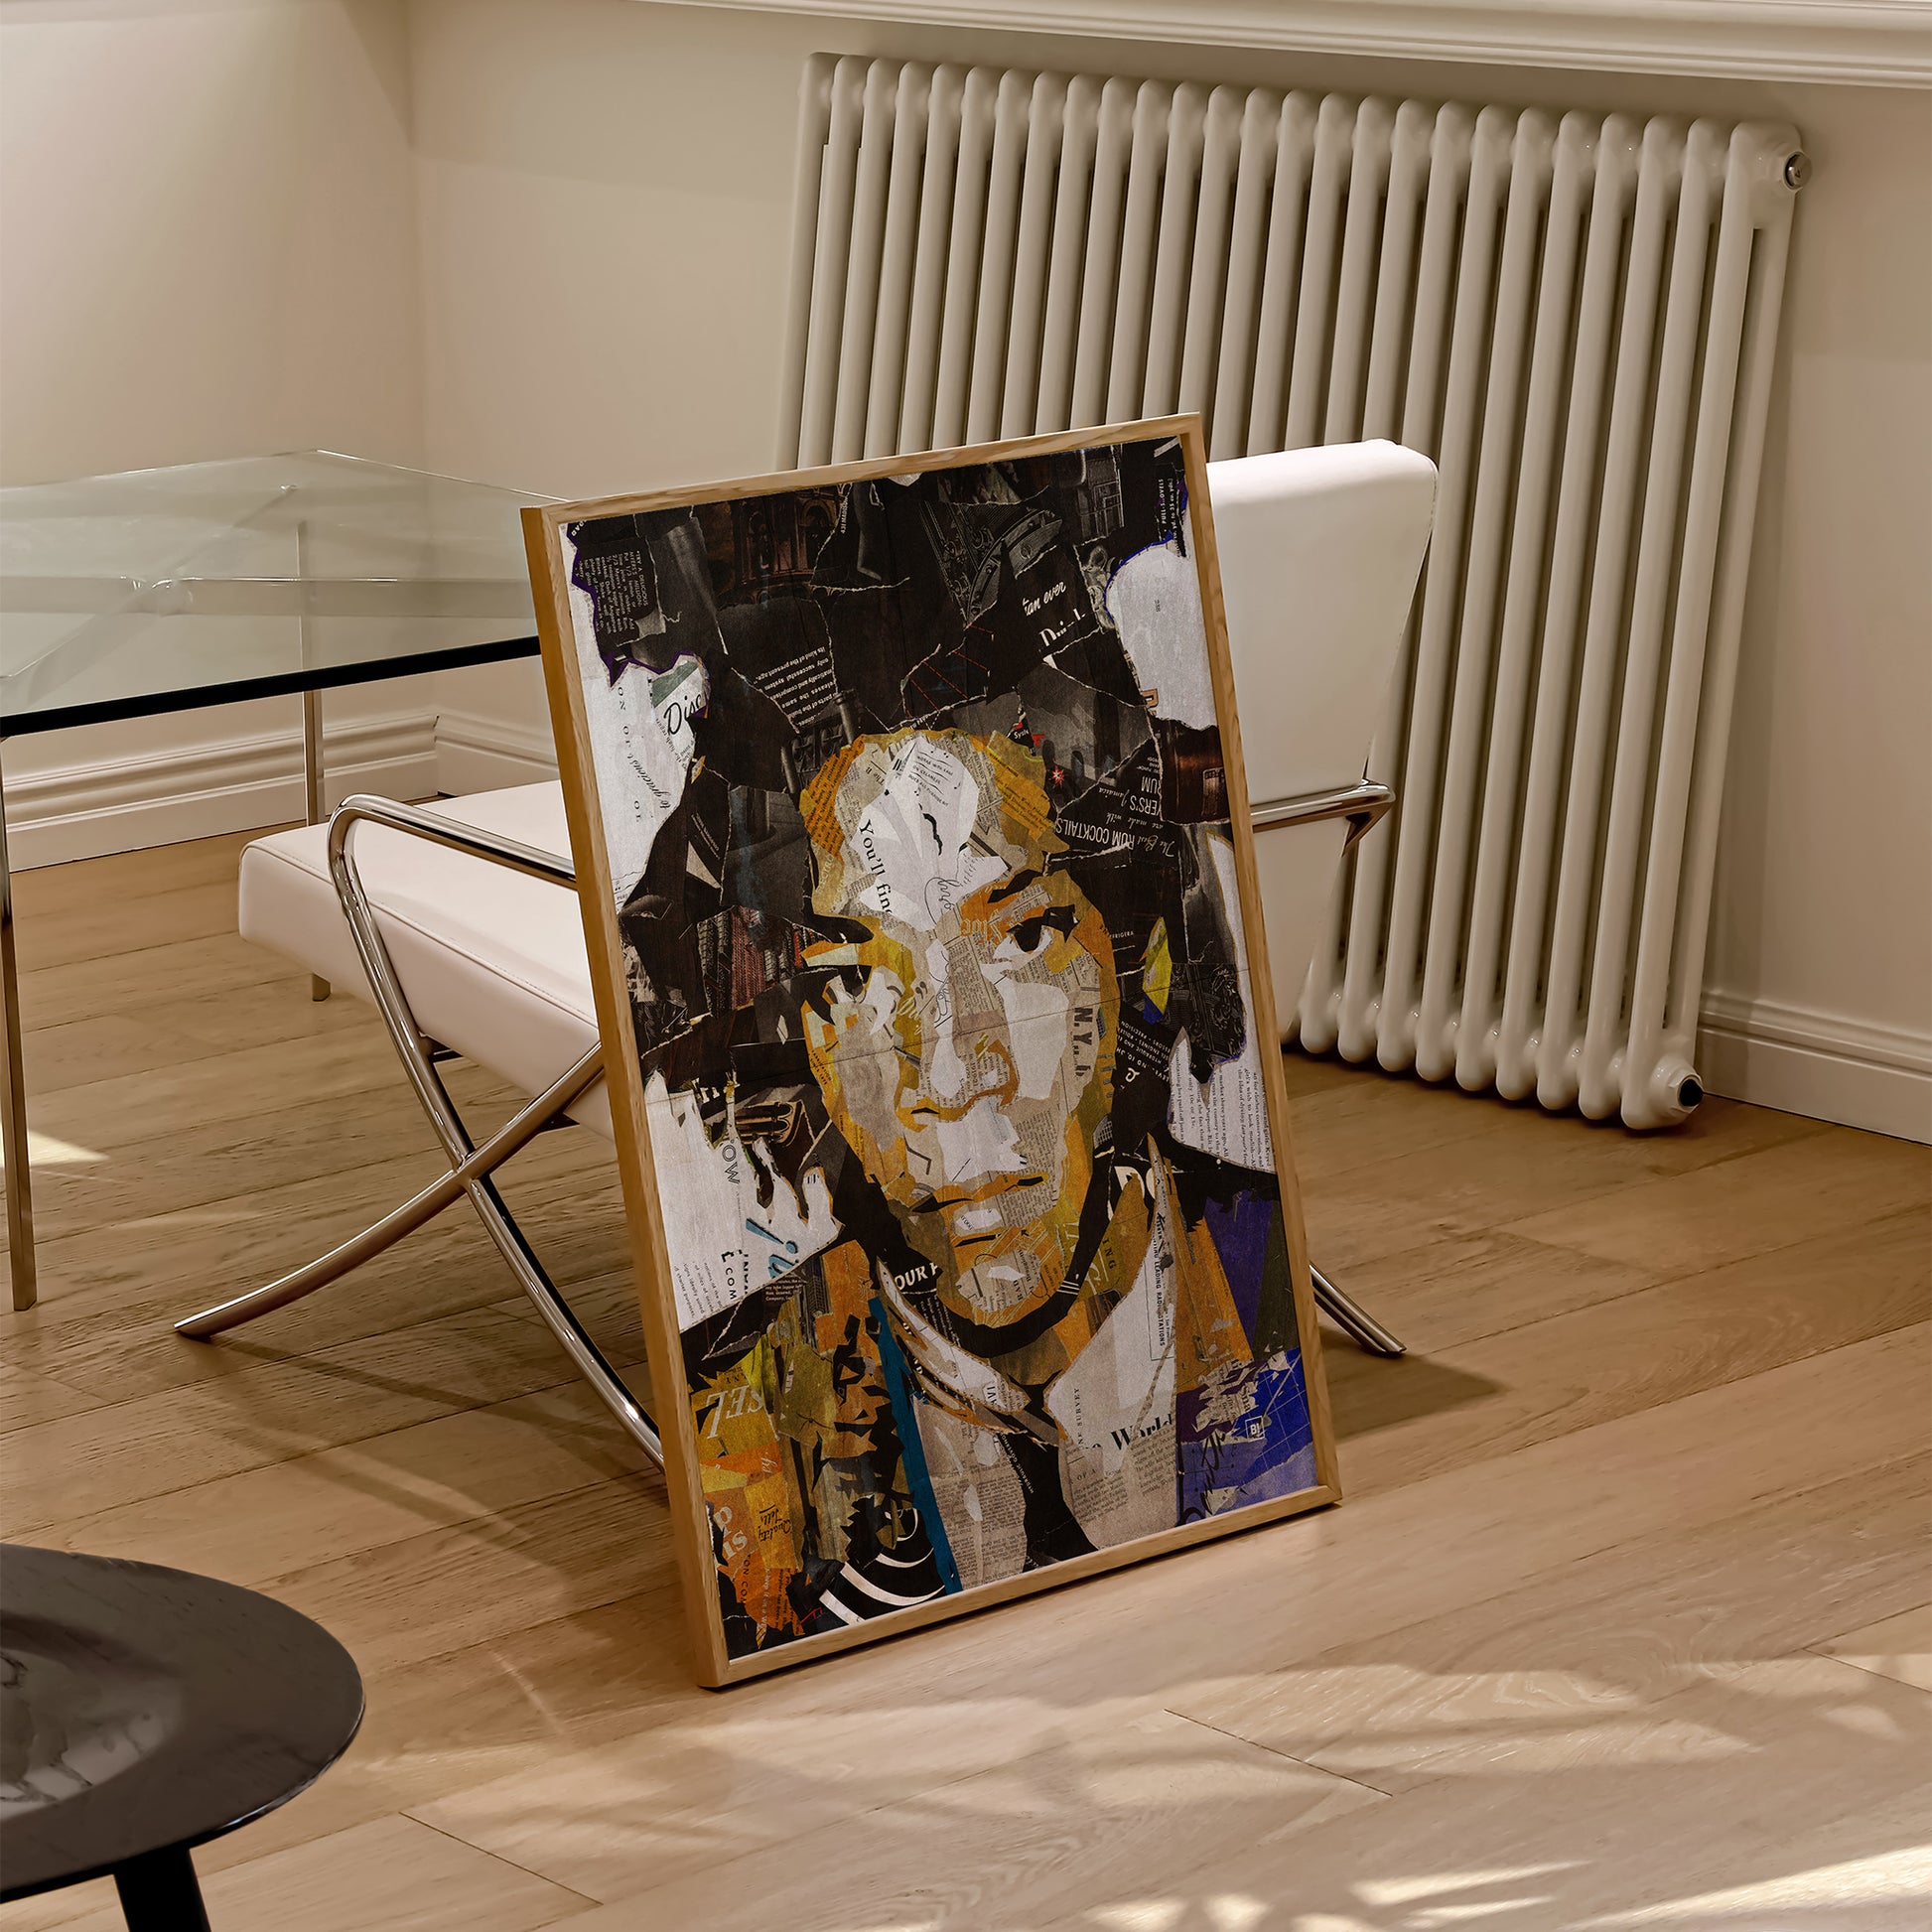 Be inspired by our iconic collage portrait art print of Jean-Michel Basquiat. This artwork was printed using the giclée process on archival acid-free paper and is presented in a natural oak frame, capturing its timeless beauty in every detail.